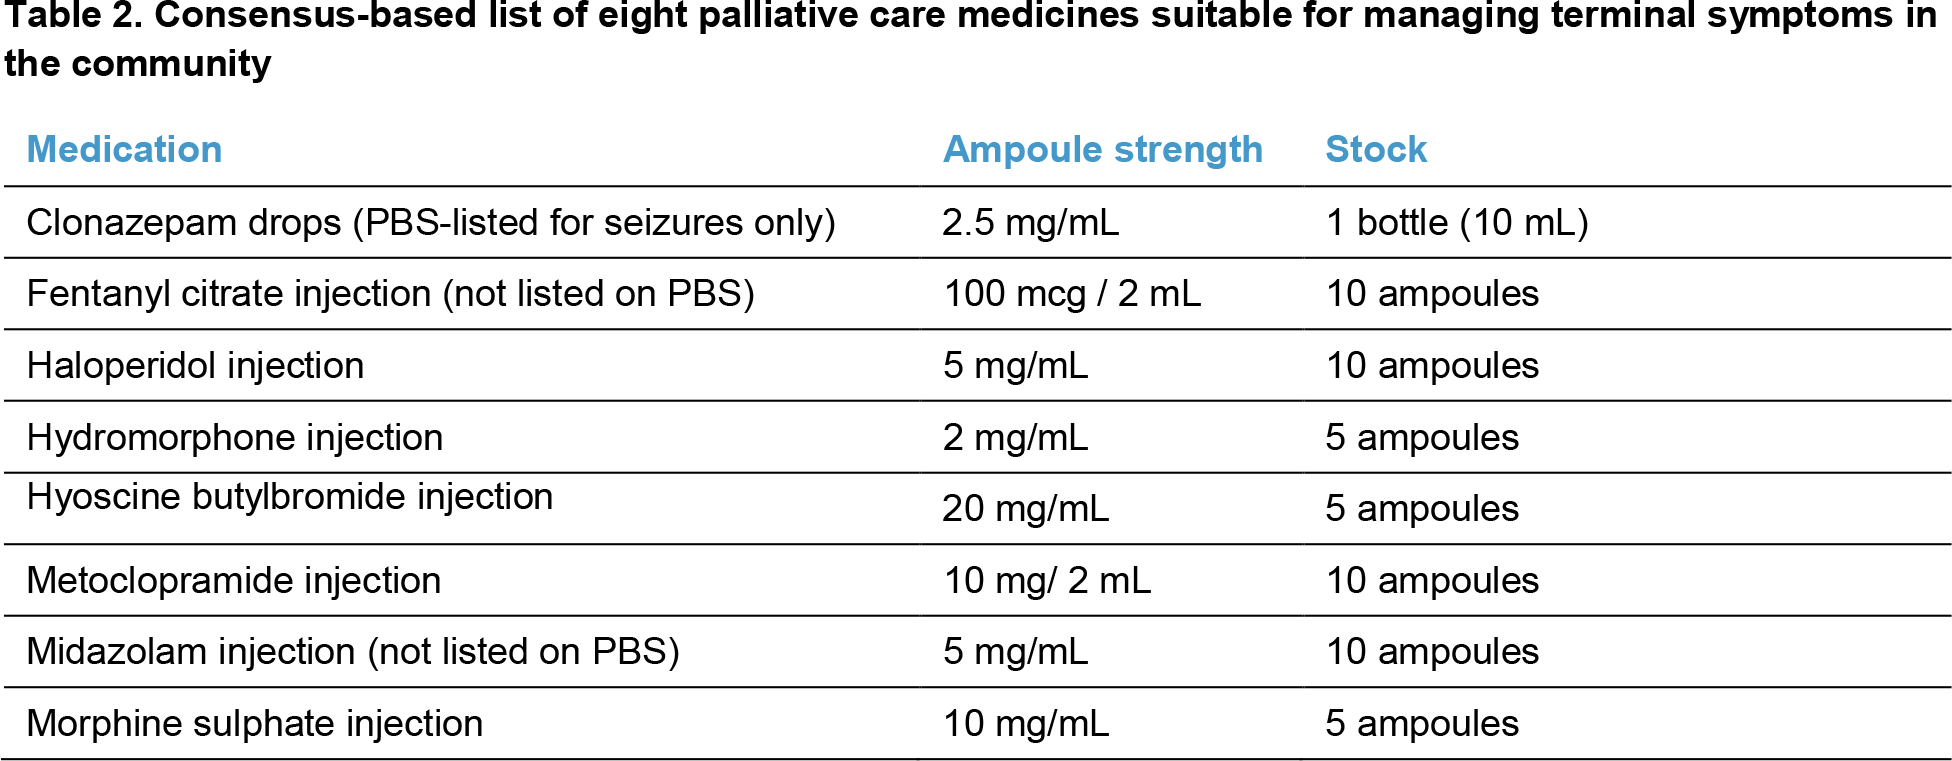 Table 2. Consensus-based list of eight palliative care medicines suitable for managing terminal symptoms in the community